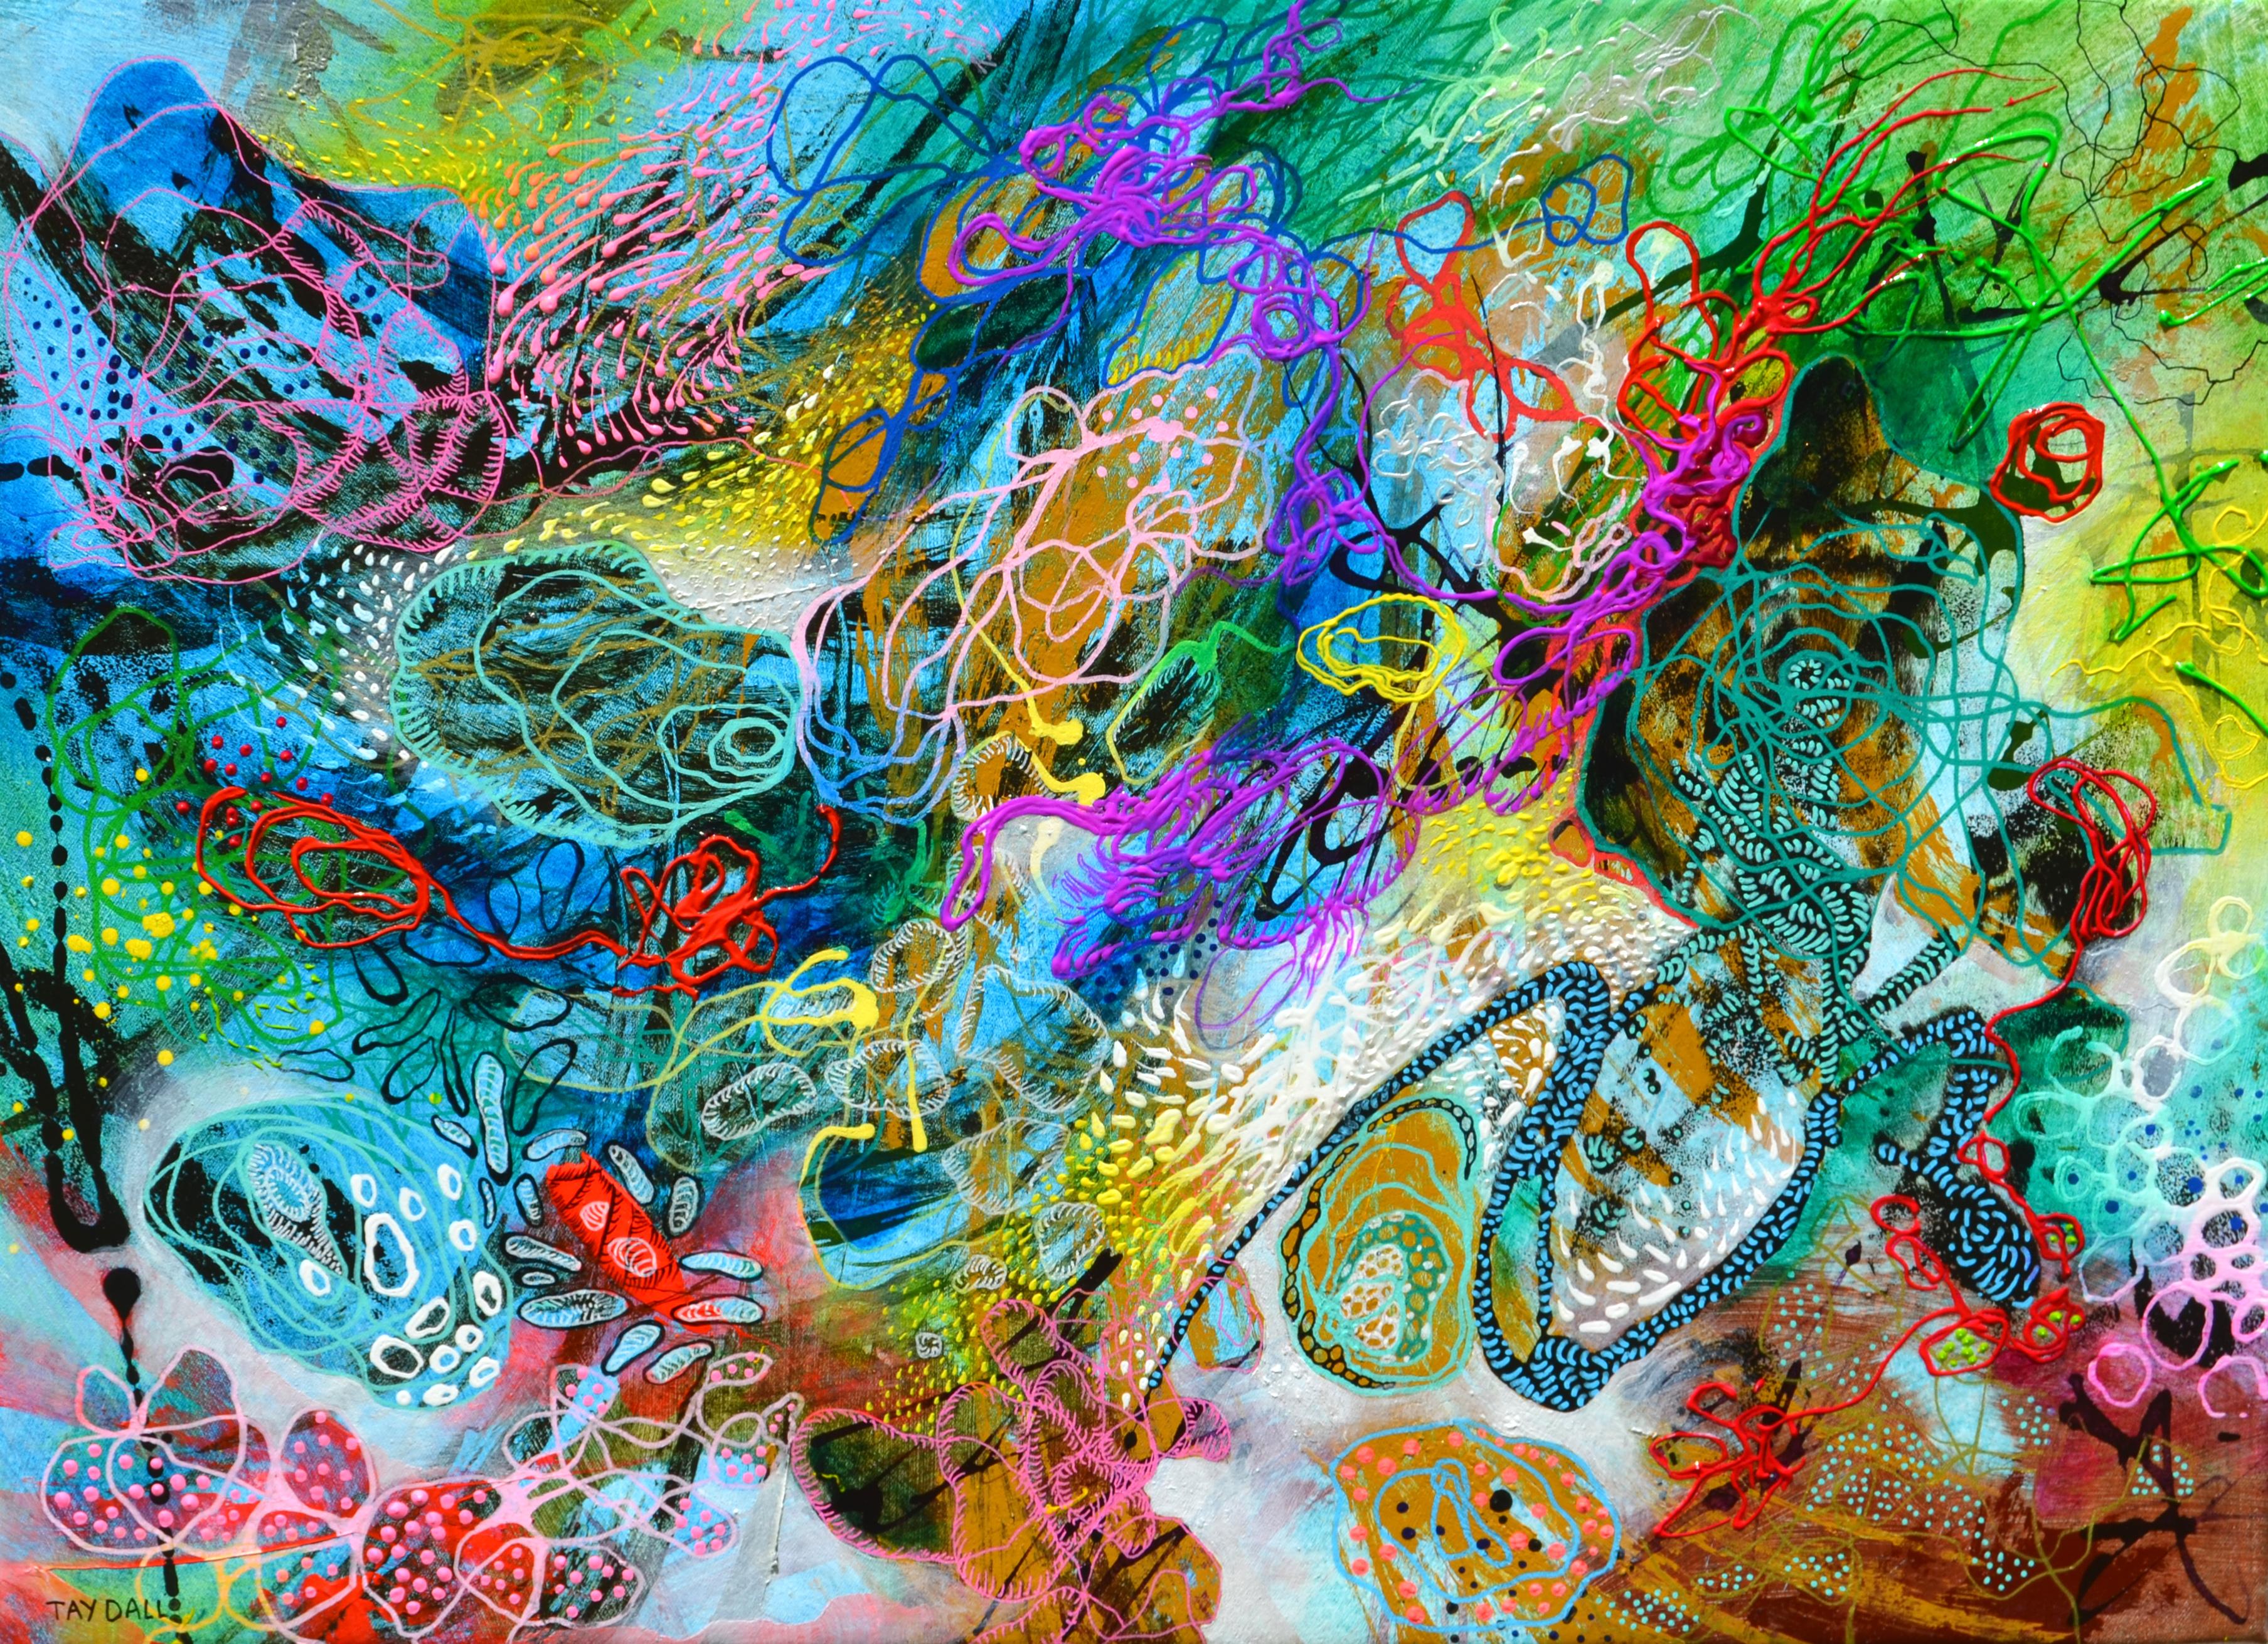 Colourful Detailed Poured Enamel and Oil Abstract Painting "Cosmos Beneath"